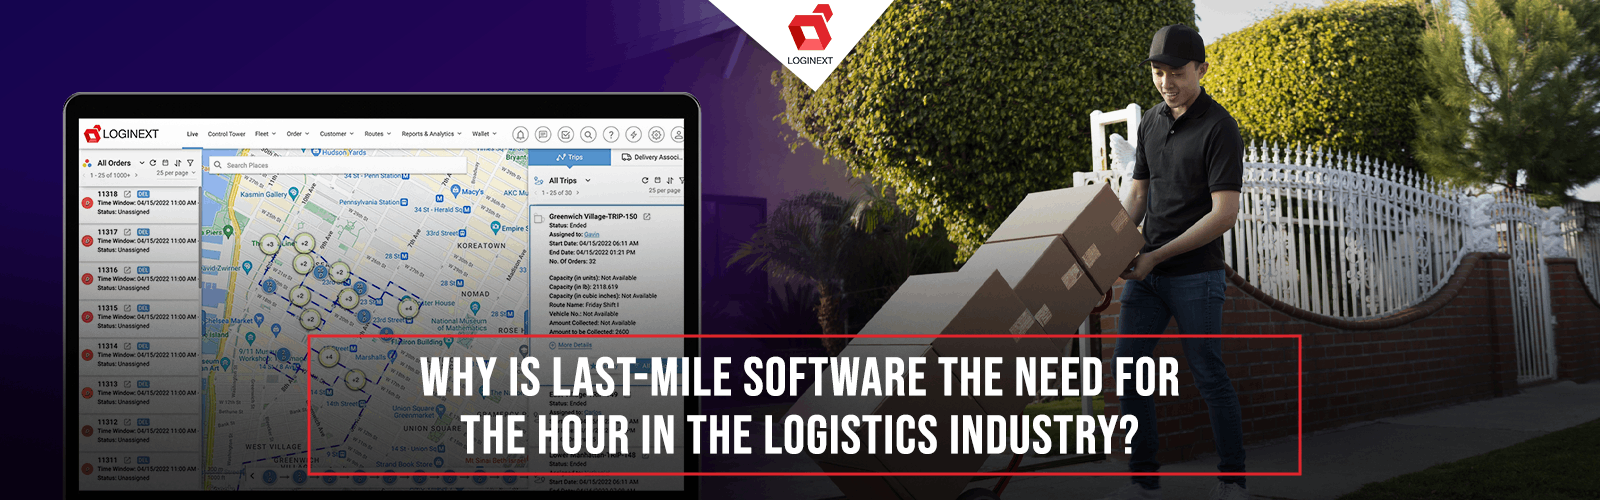 Why is the last mile software the need for the hour in the logistics industry?